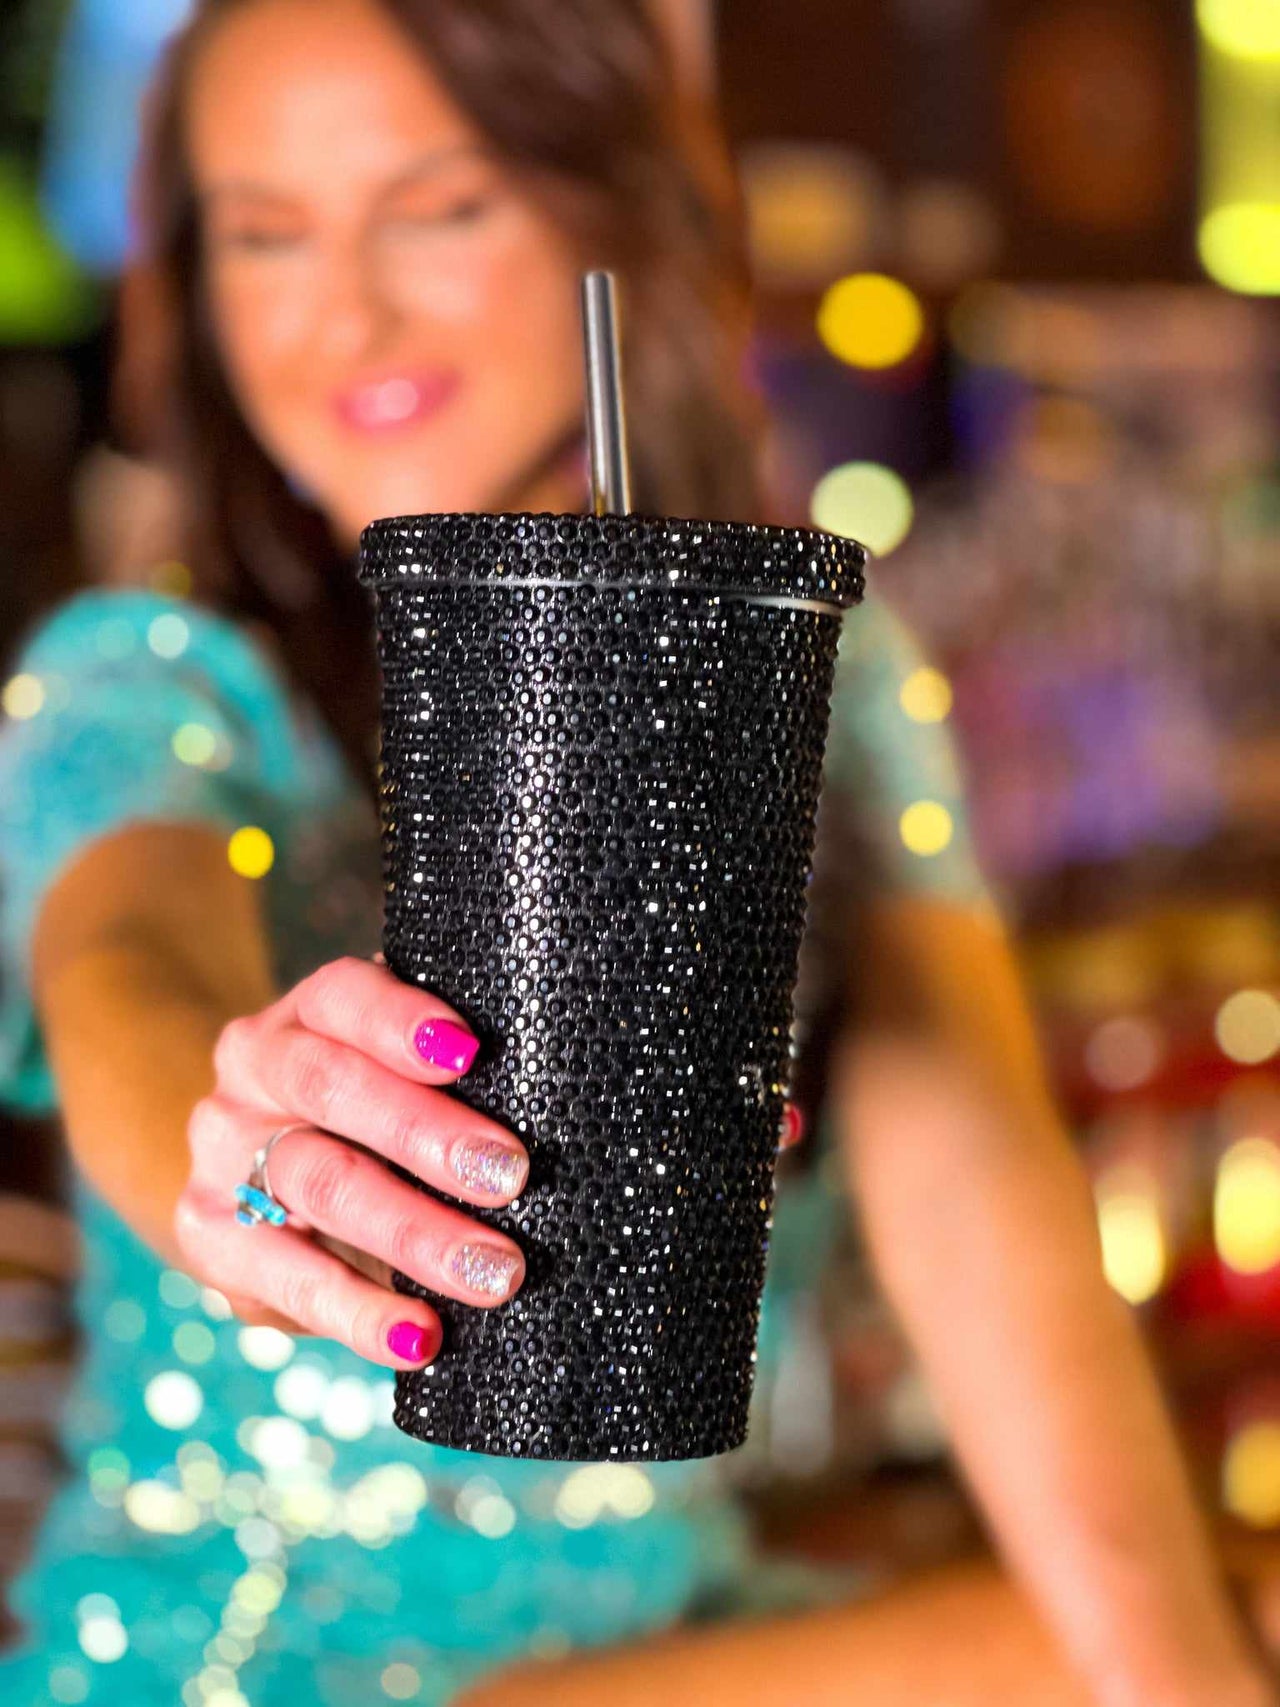 Black Rhinestone Travel Cup with Stainless steel straw.